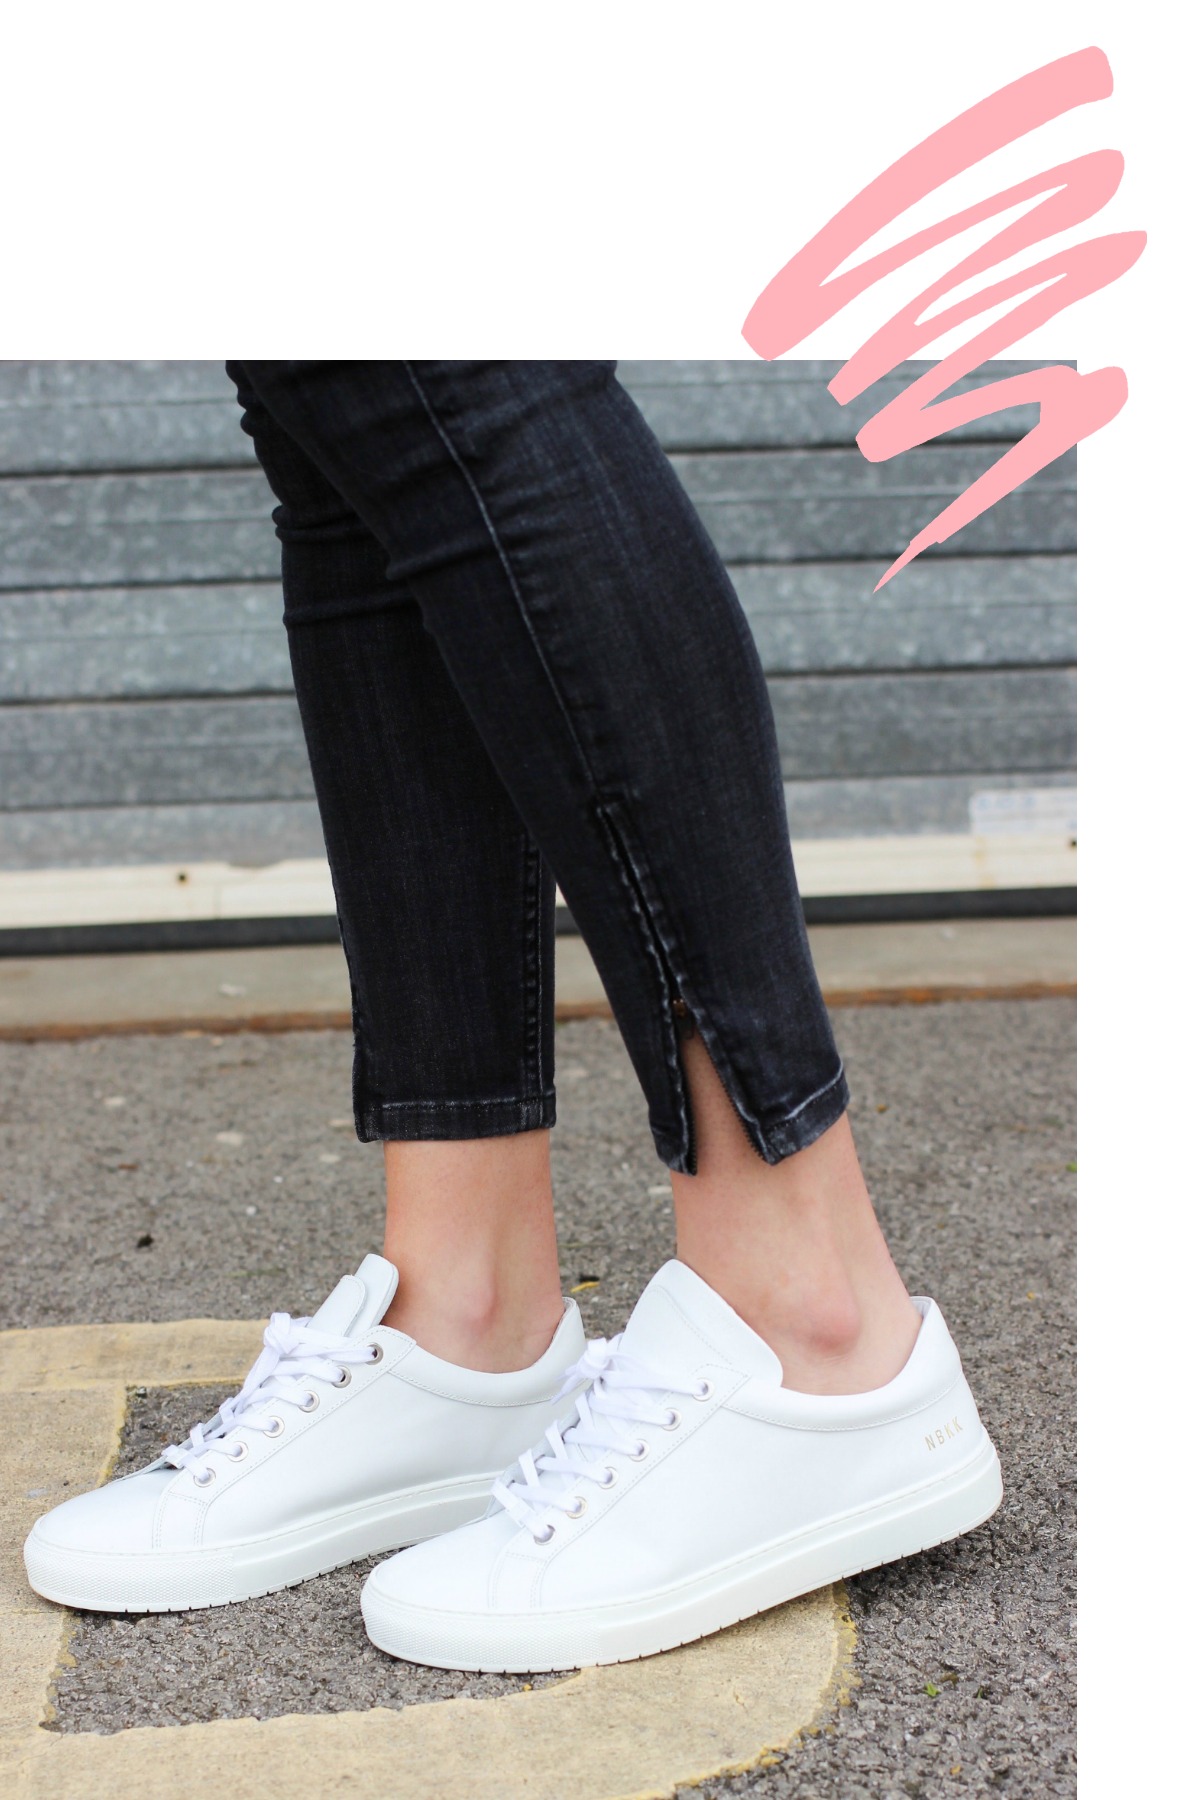 white trainers style